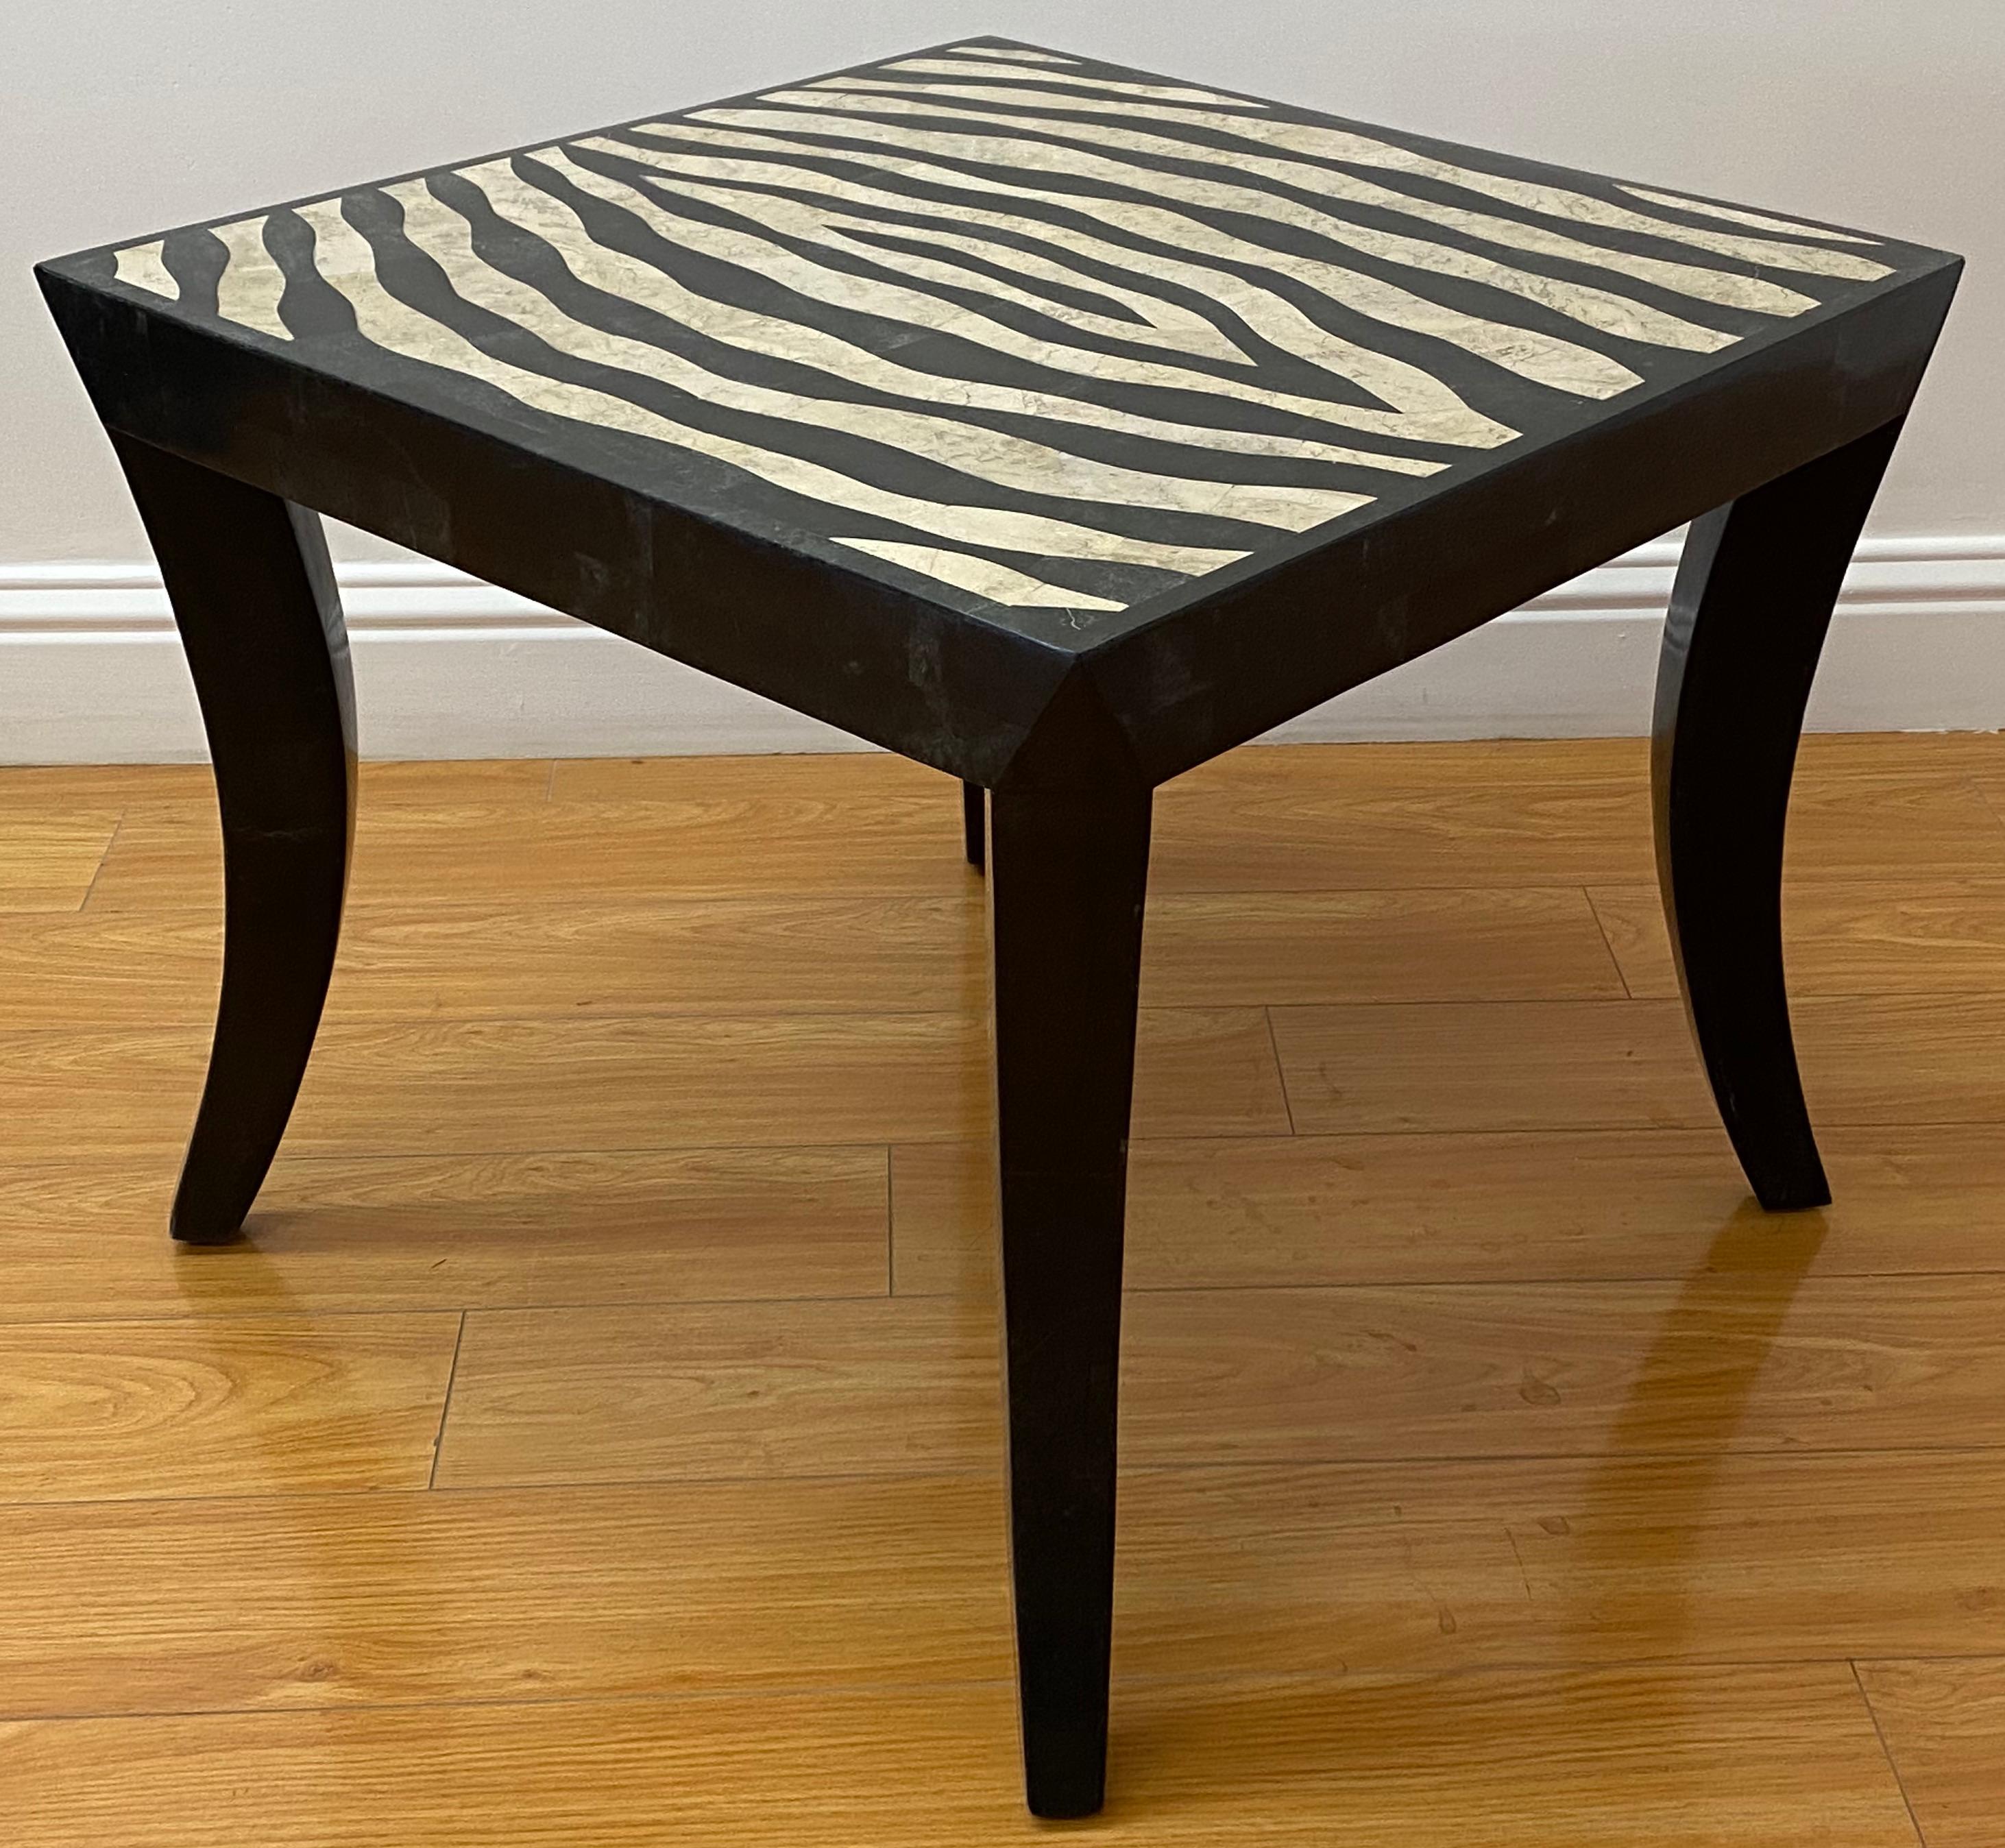 Zebra pattern stone inlay side / coffee table

Nice vintage coffee / side table with stone inlay over black lacquer

Measures: 24